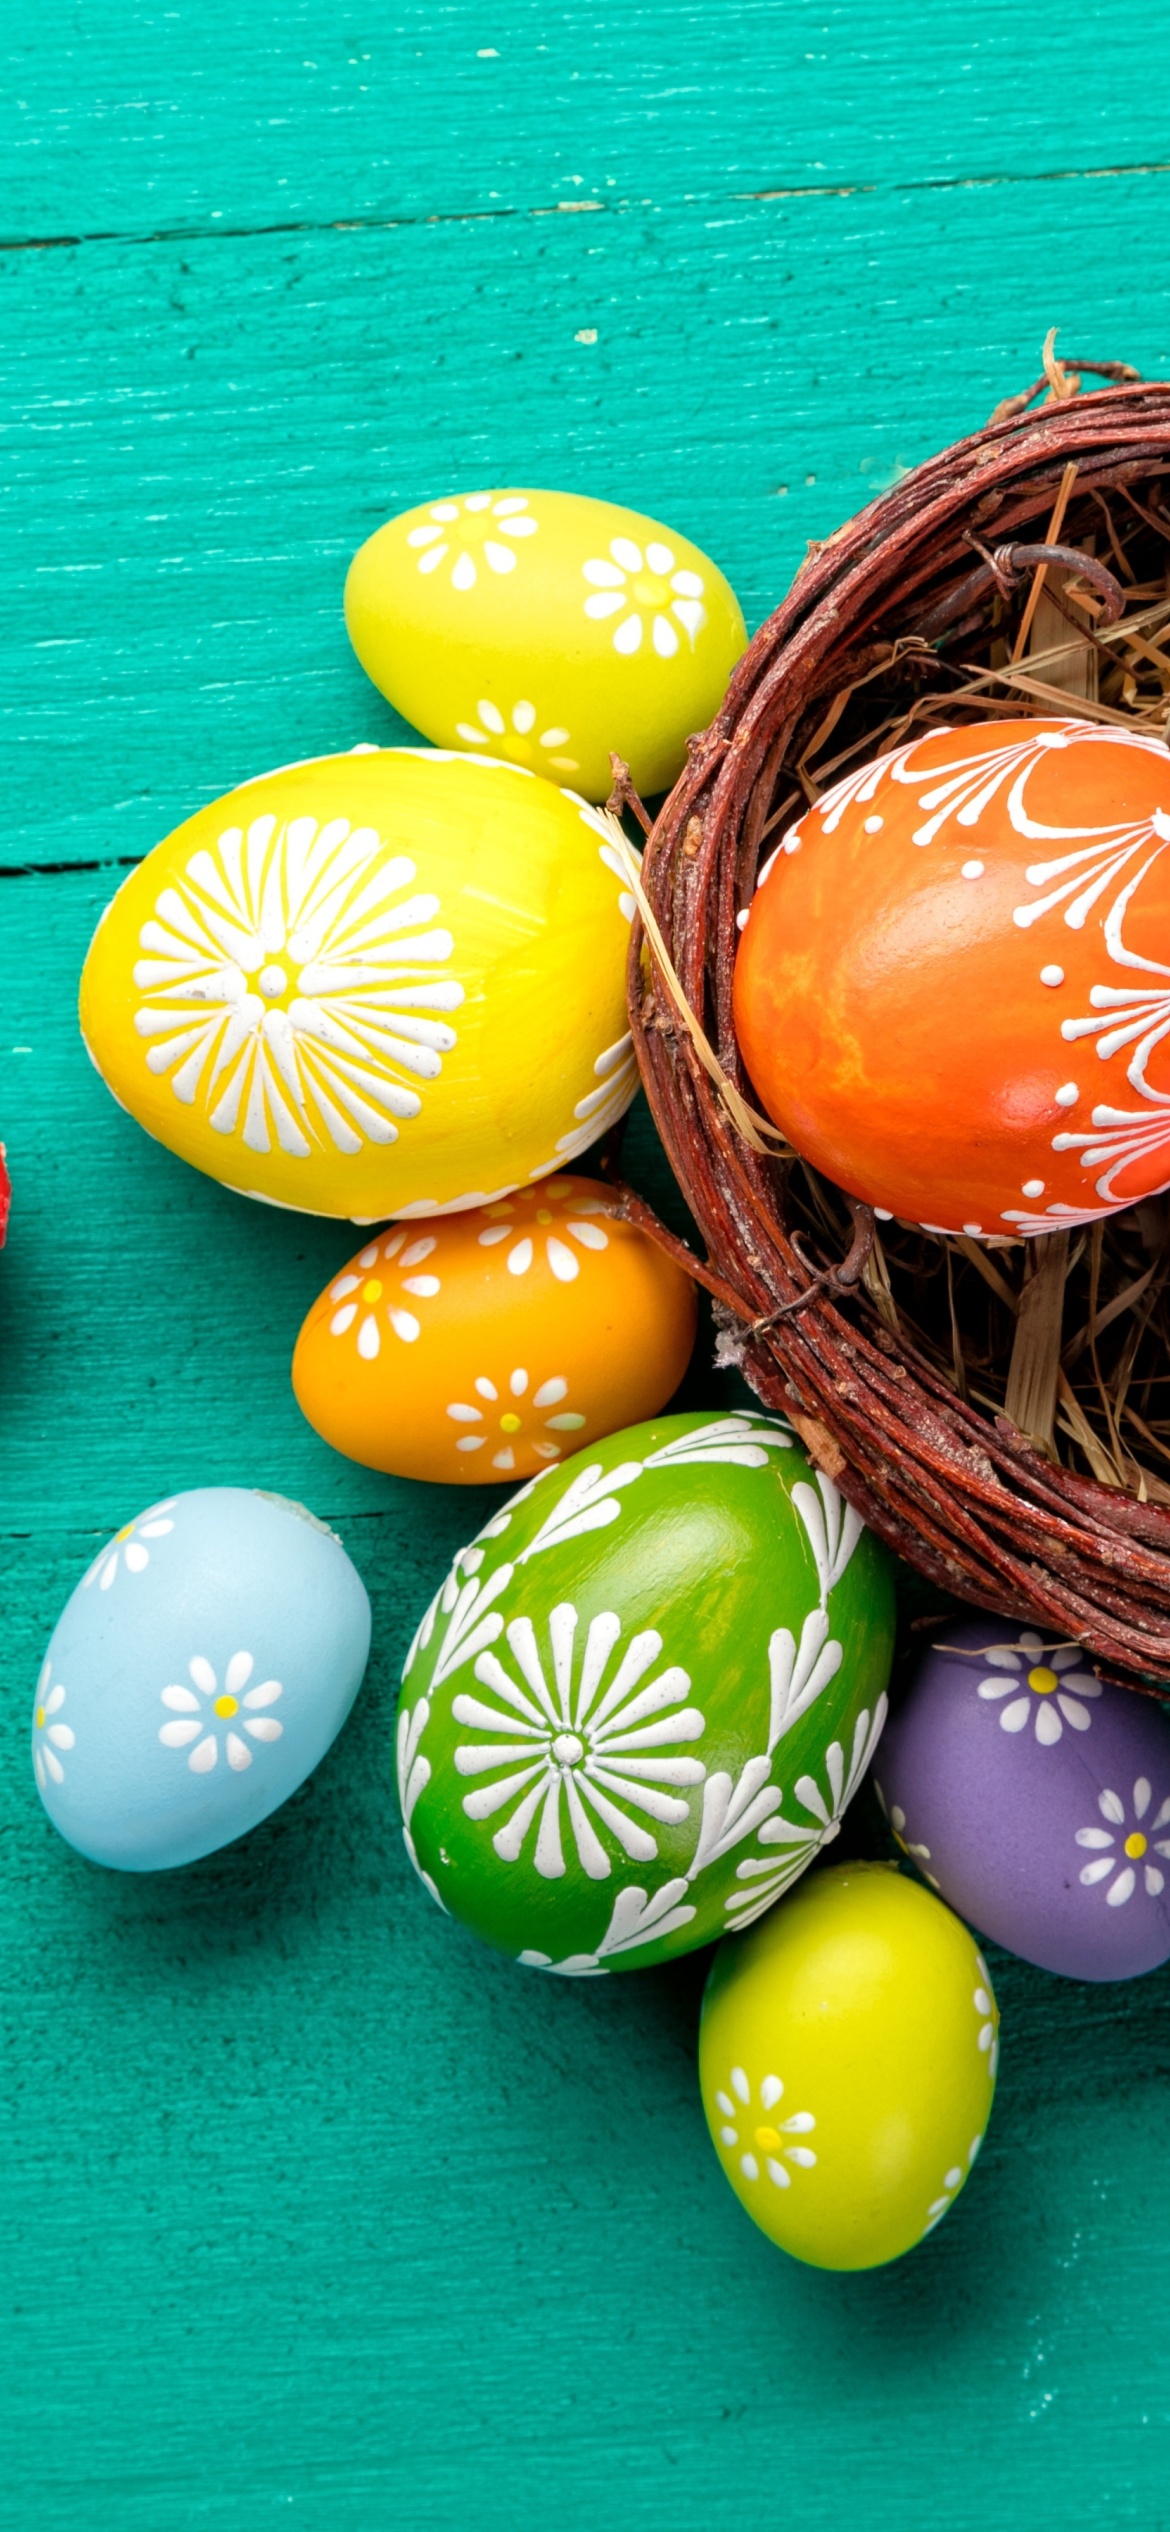 Dyed easter eggs wallpaper 1170x2532